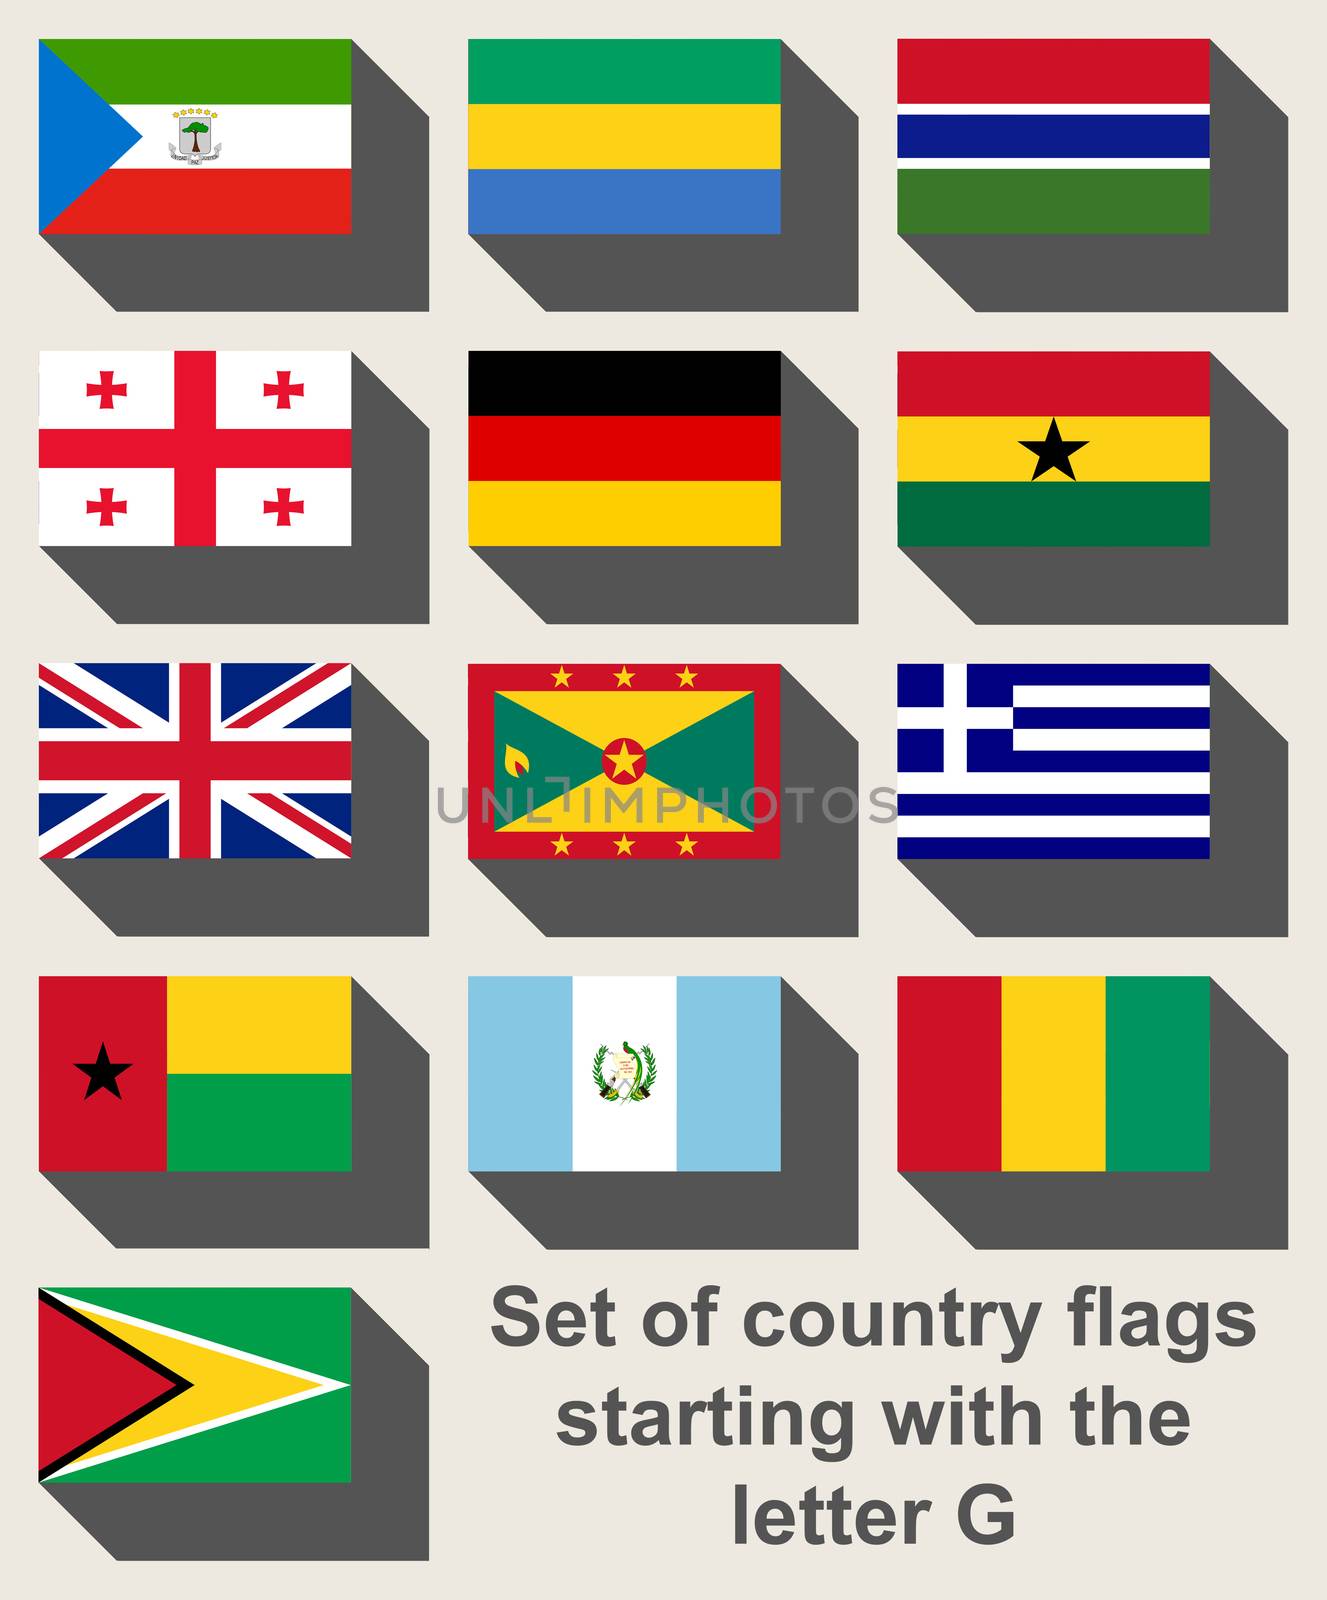 Set of flags starting with the letter G in flat web design style.